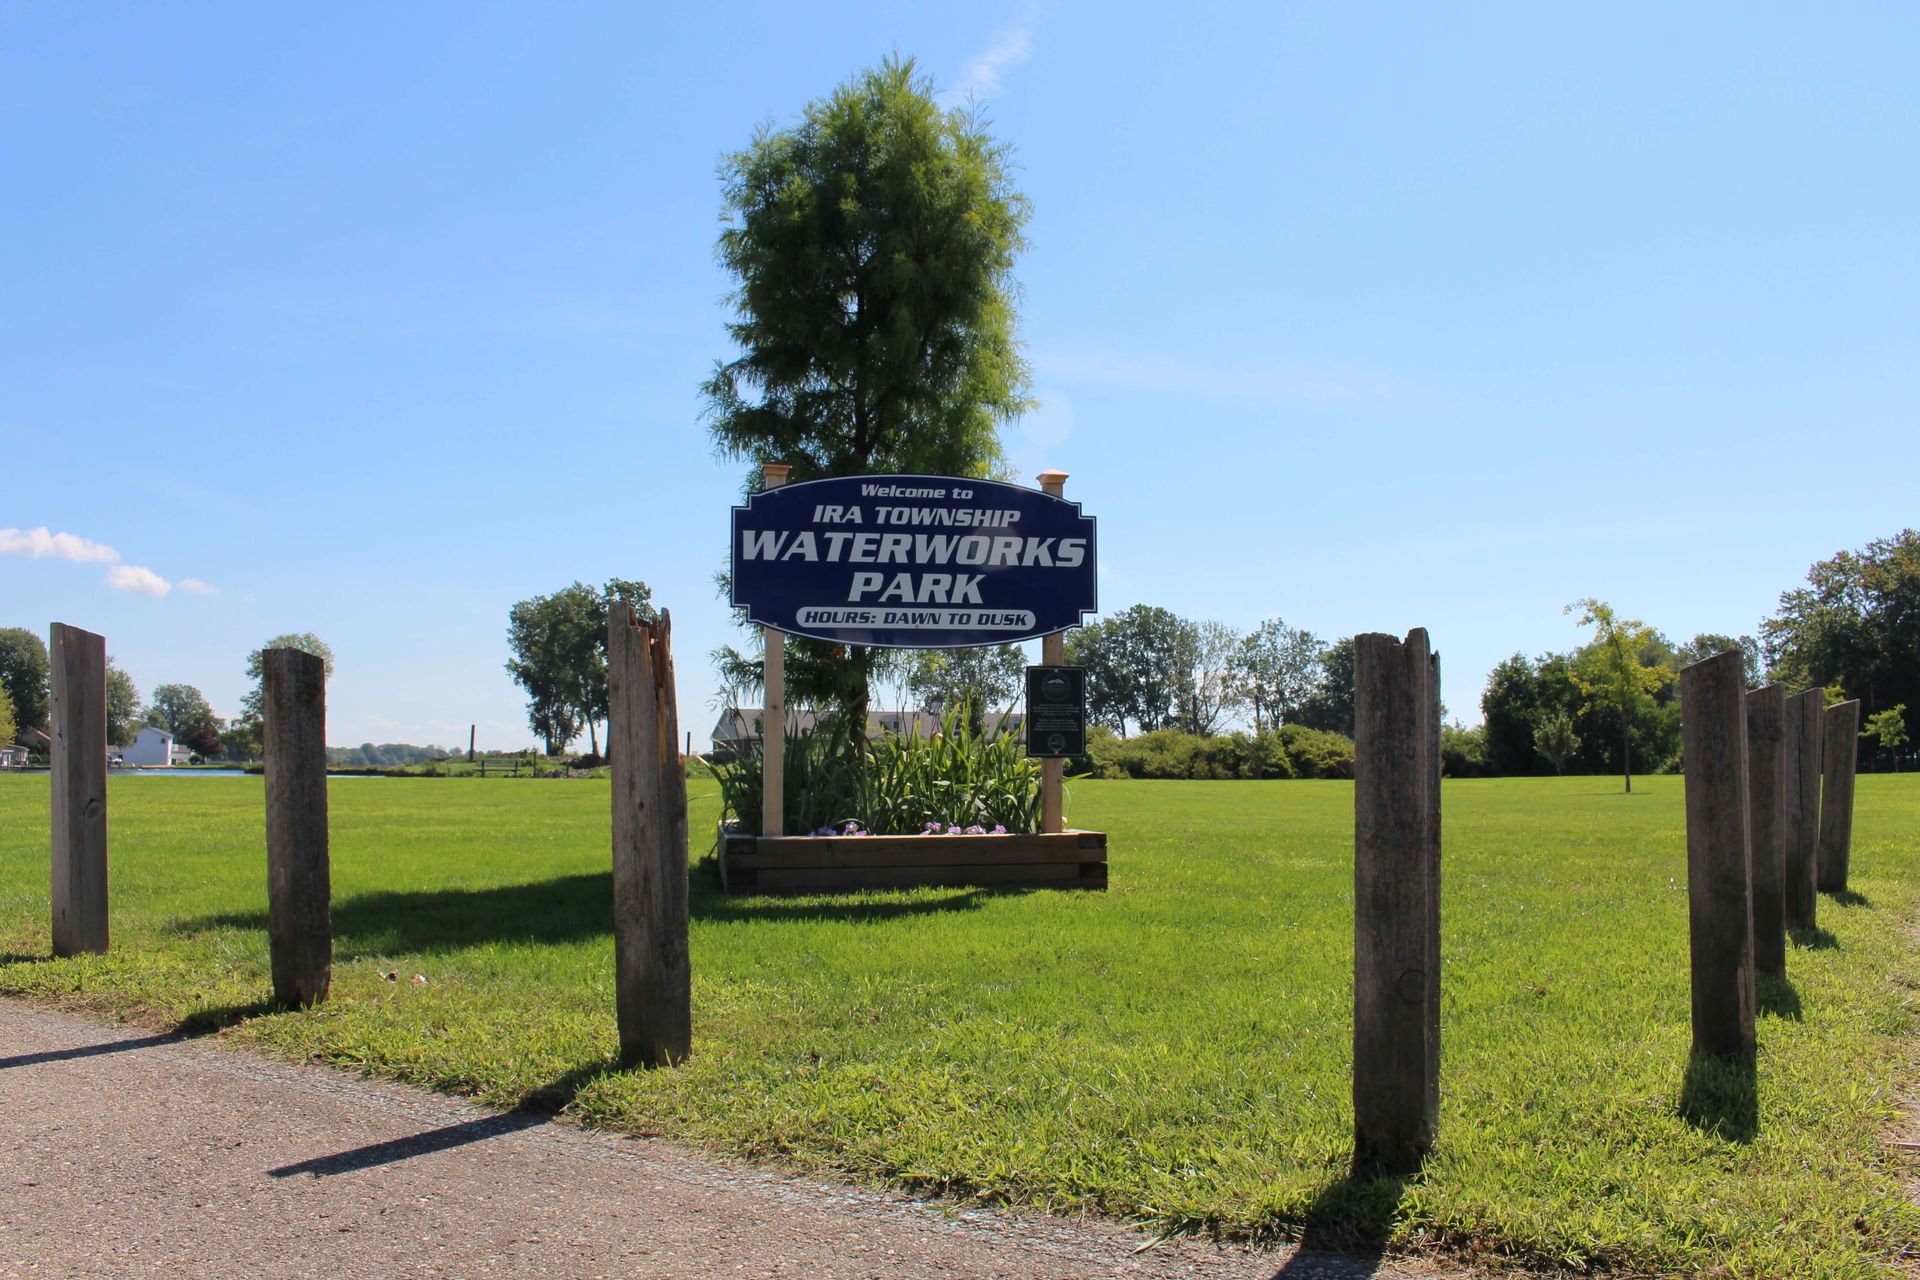 A sign in the middle of a grassy field says Welcome to Ira Township Waterworks Park.